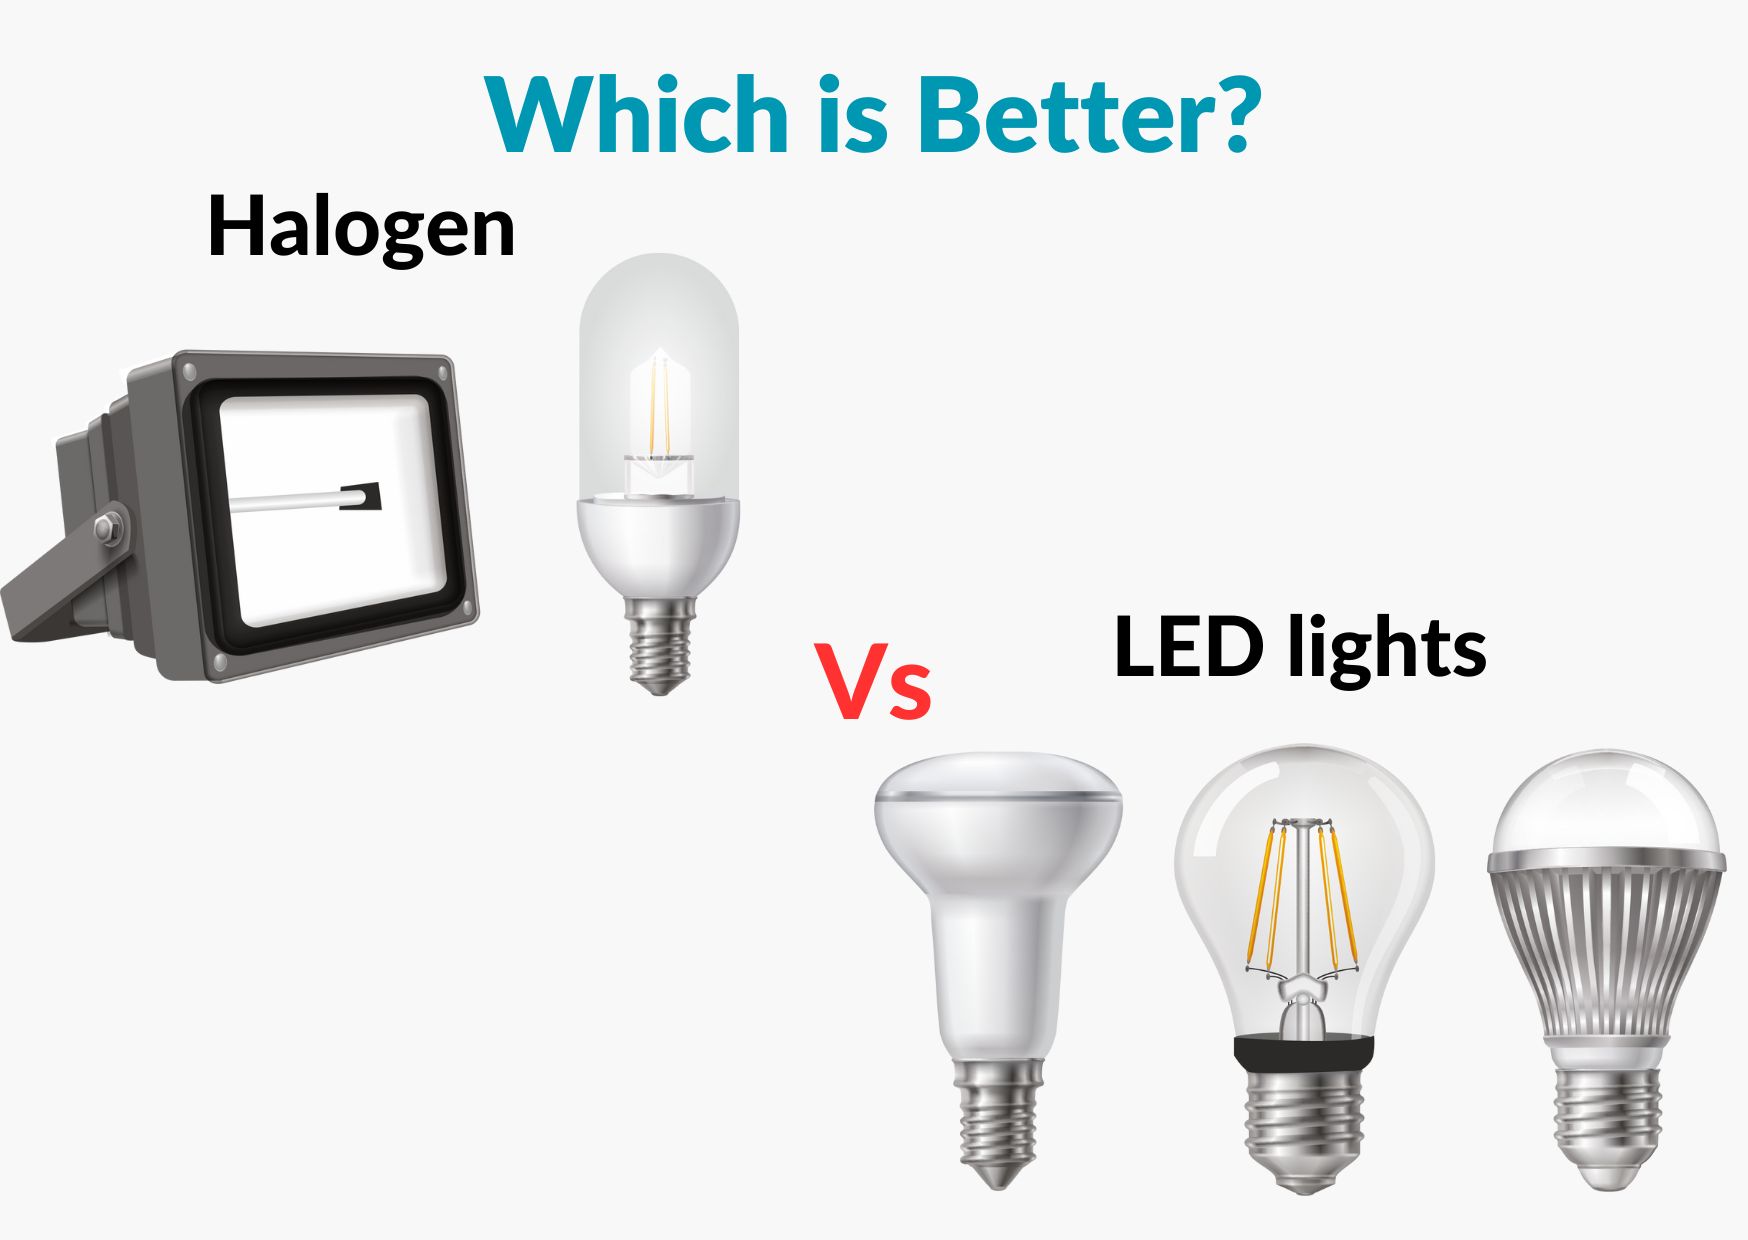 Halogen Vs LED lights - Which is Better? - ElectronicsHub